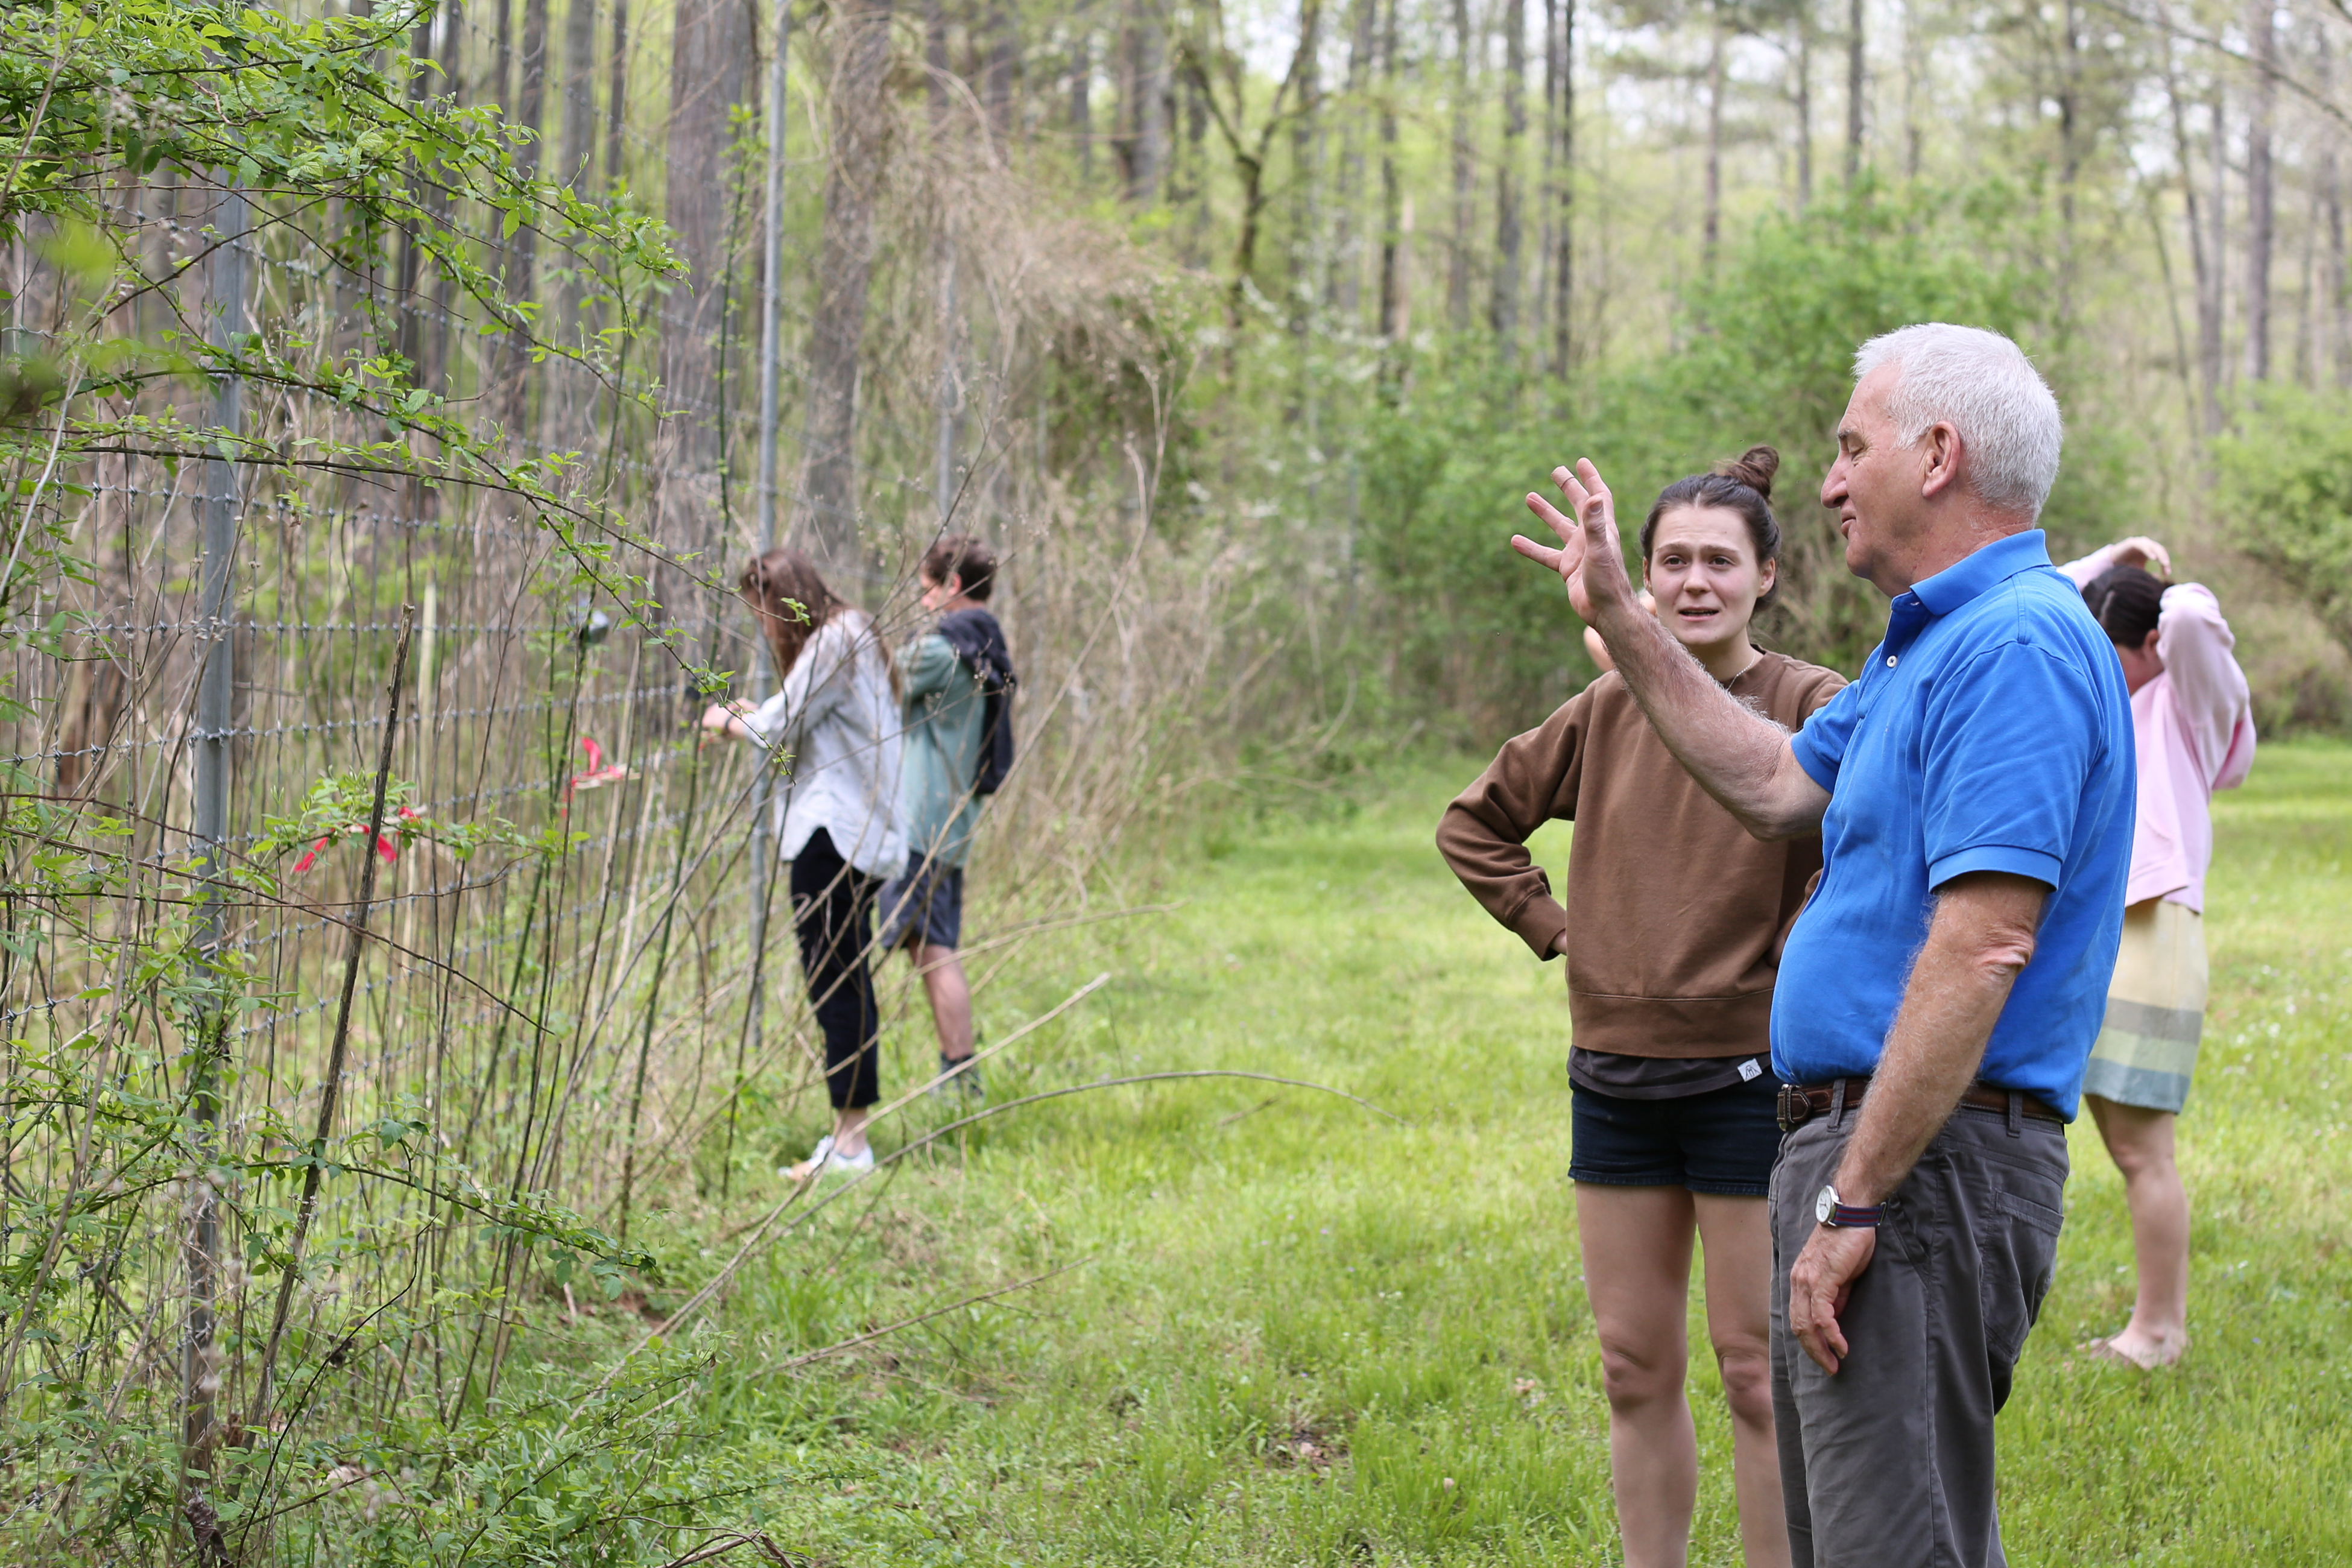 UGA students in Jim Affolter’s native plant horticulture class